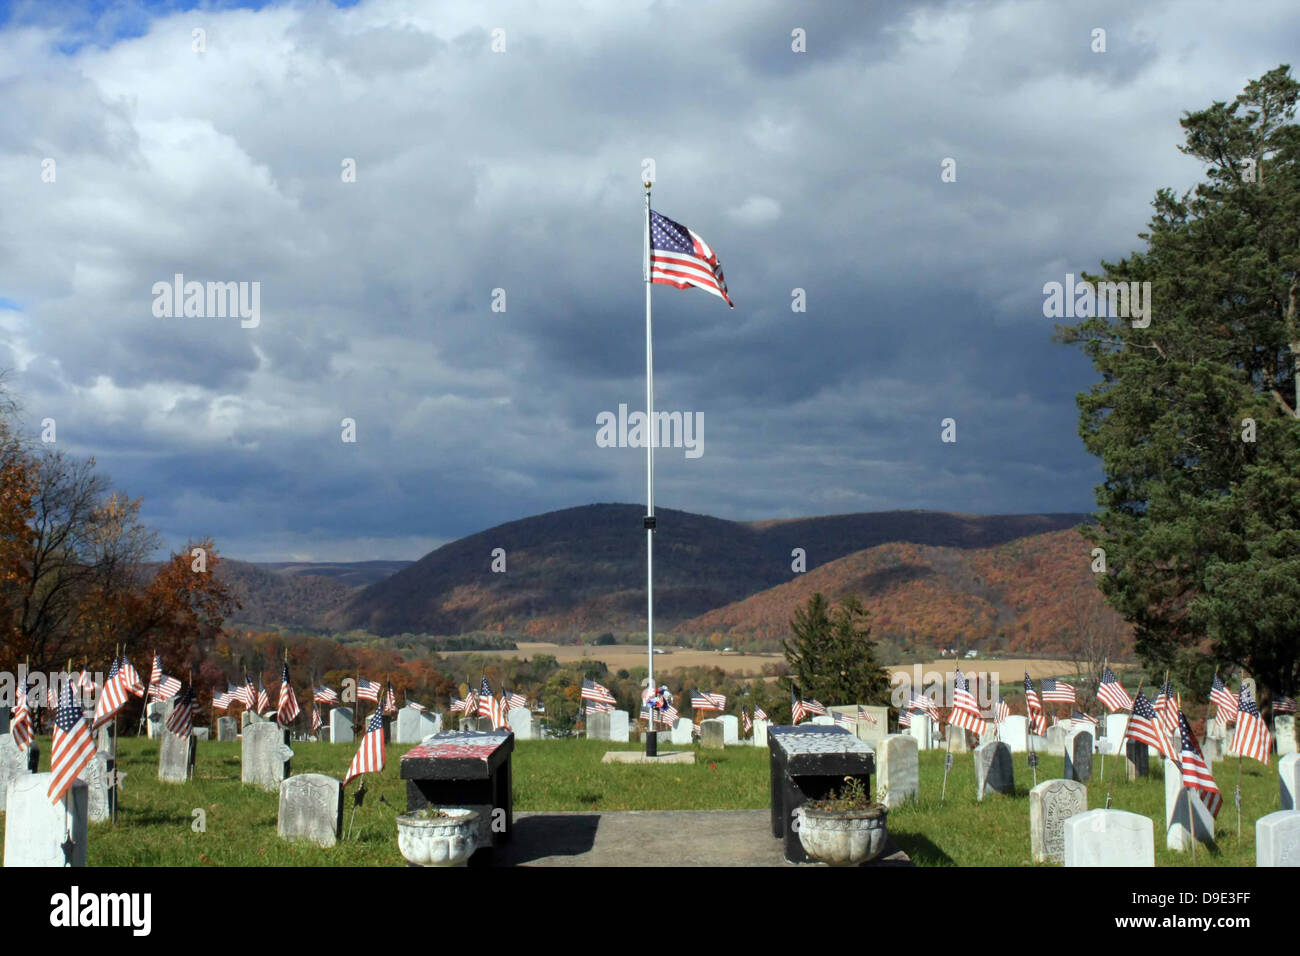 GRAVE HIGHLAND CEMETERY, SOLDIERS CIRCLE, VETERANS OF ALL WARS, AMERICAN FLAGS. MOUNTAINS, TREES, AND STORM CLOUDS IN BACKGROUND Stock Photo